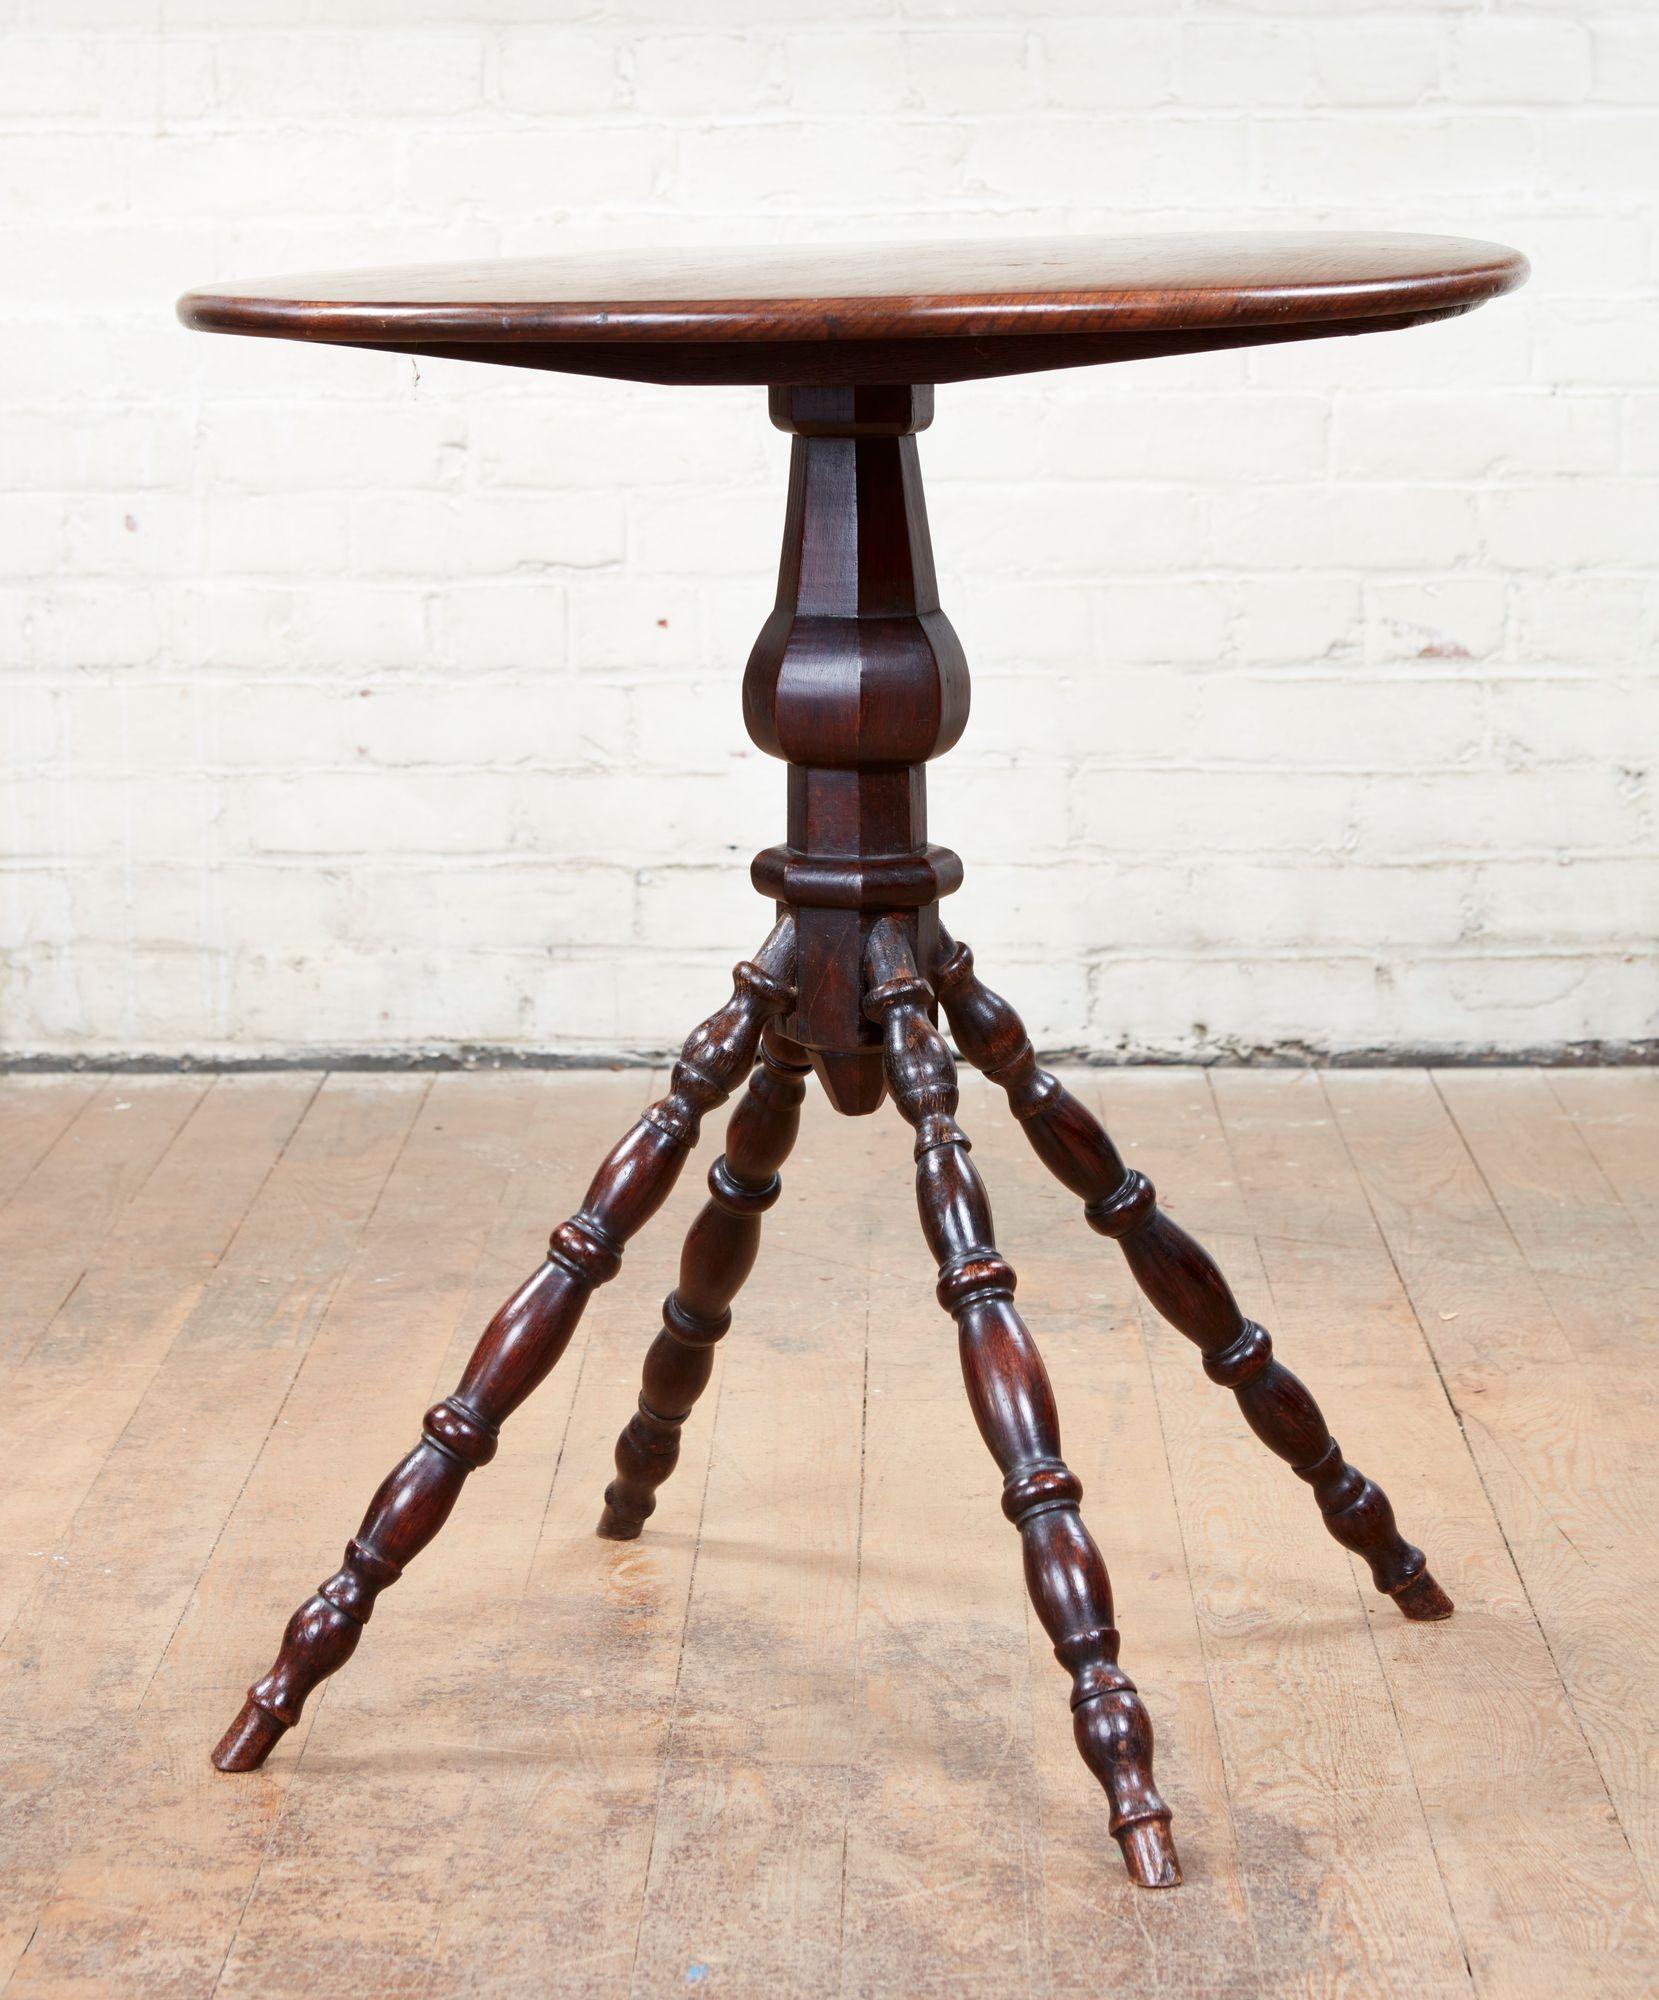 A unique 19th century English spindle table perfect for a drinks table next to the arm of a sofa. Nicely figured elm top on faceted column shaft ending in four bobbin turned legs. Striking and distinctive profile and rich patination.